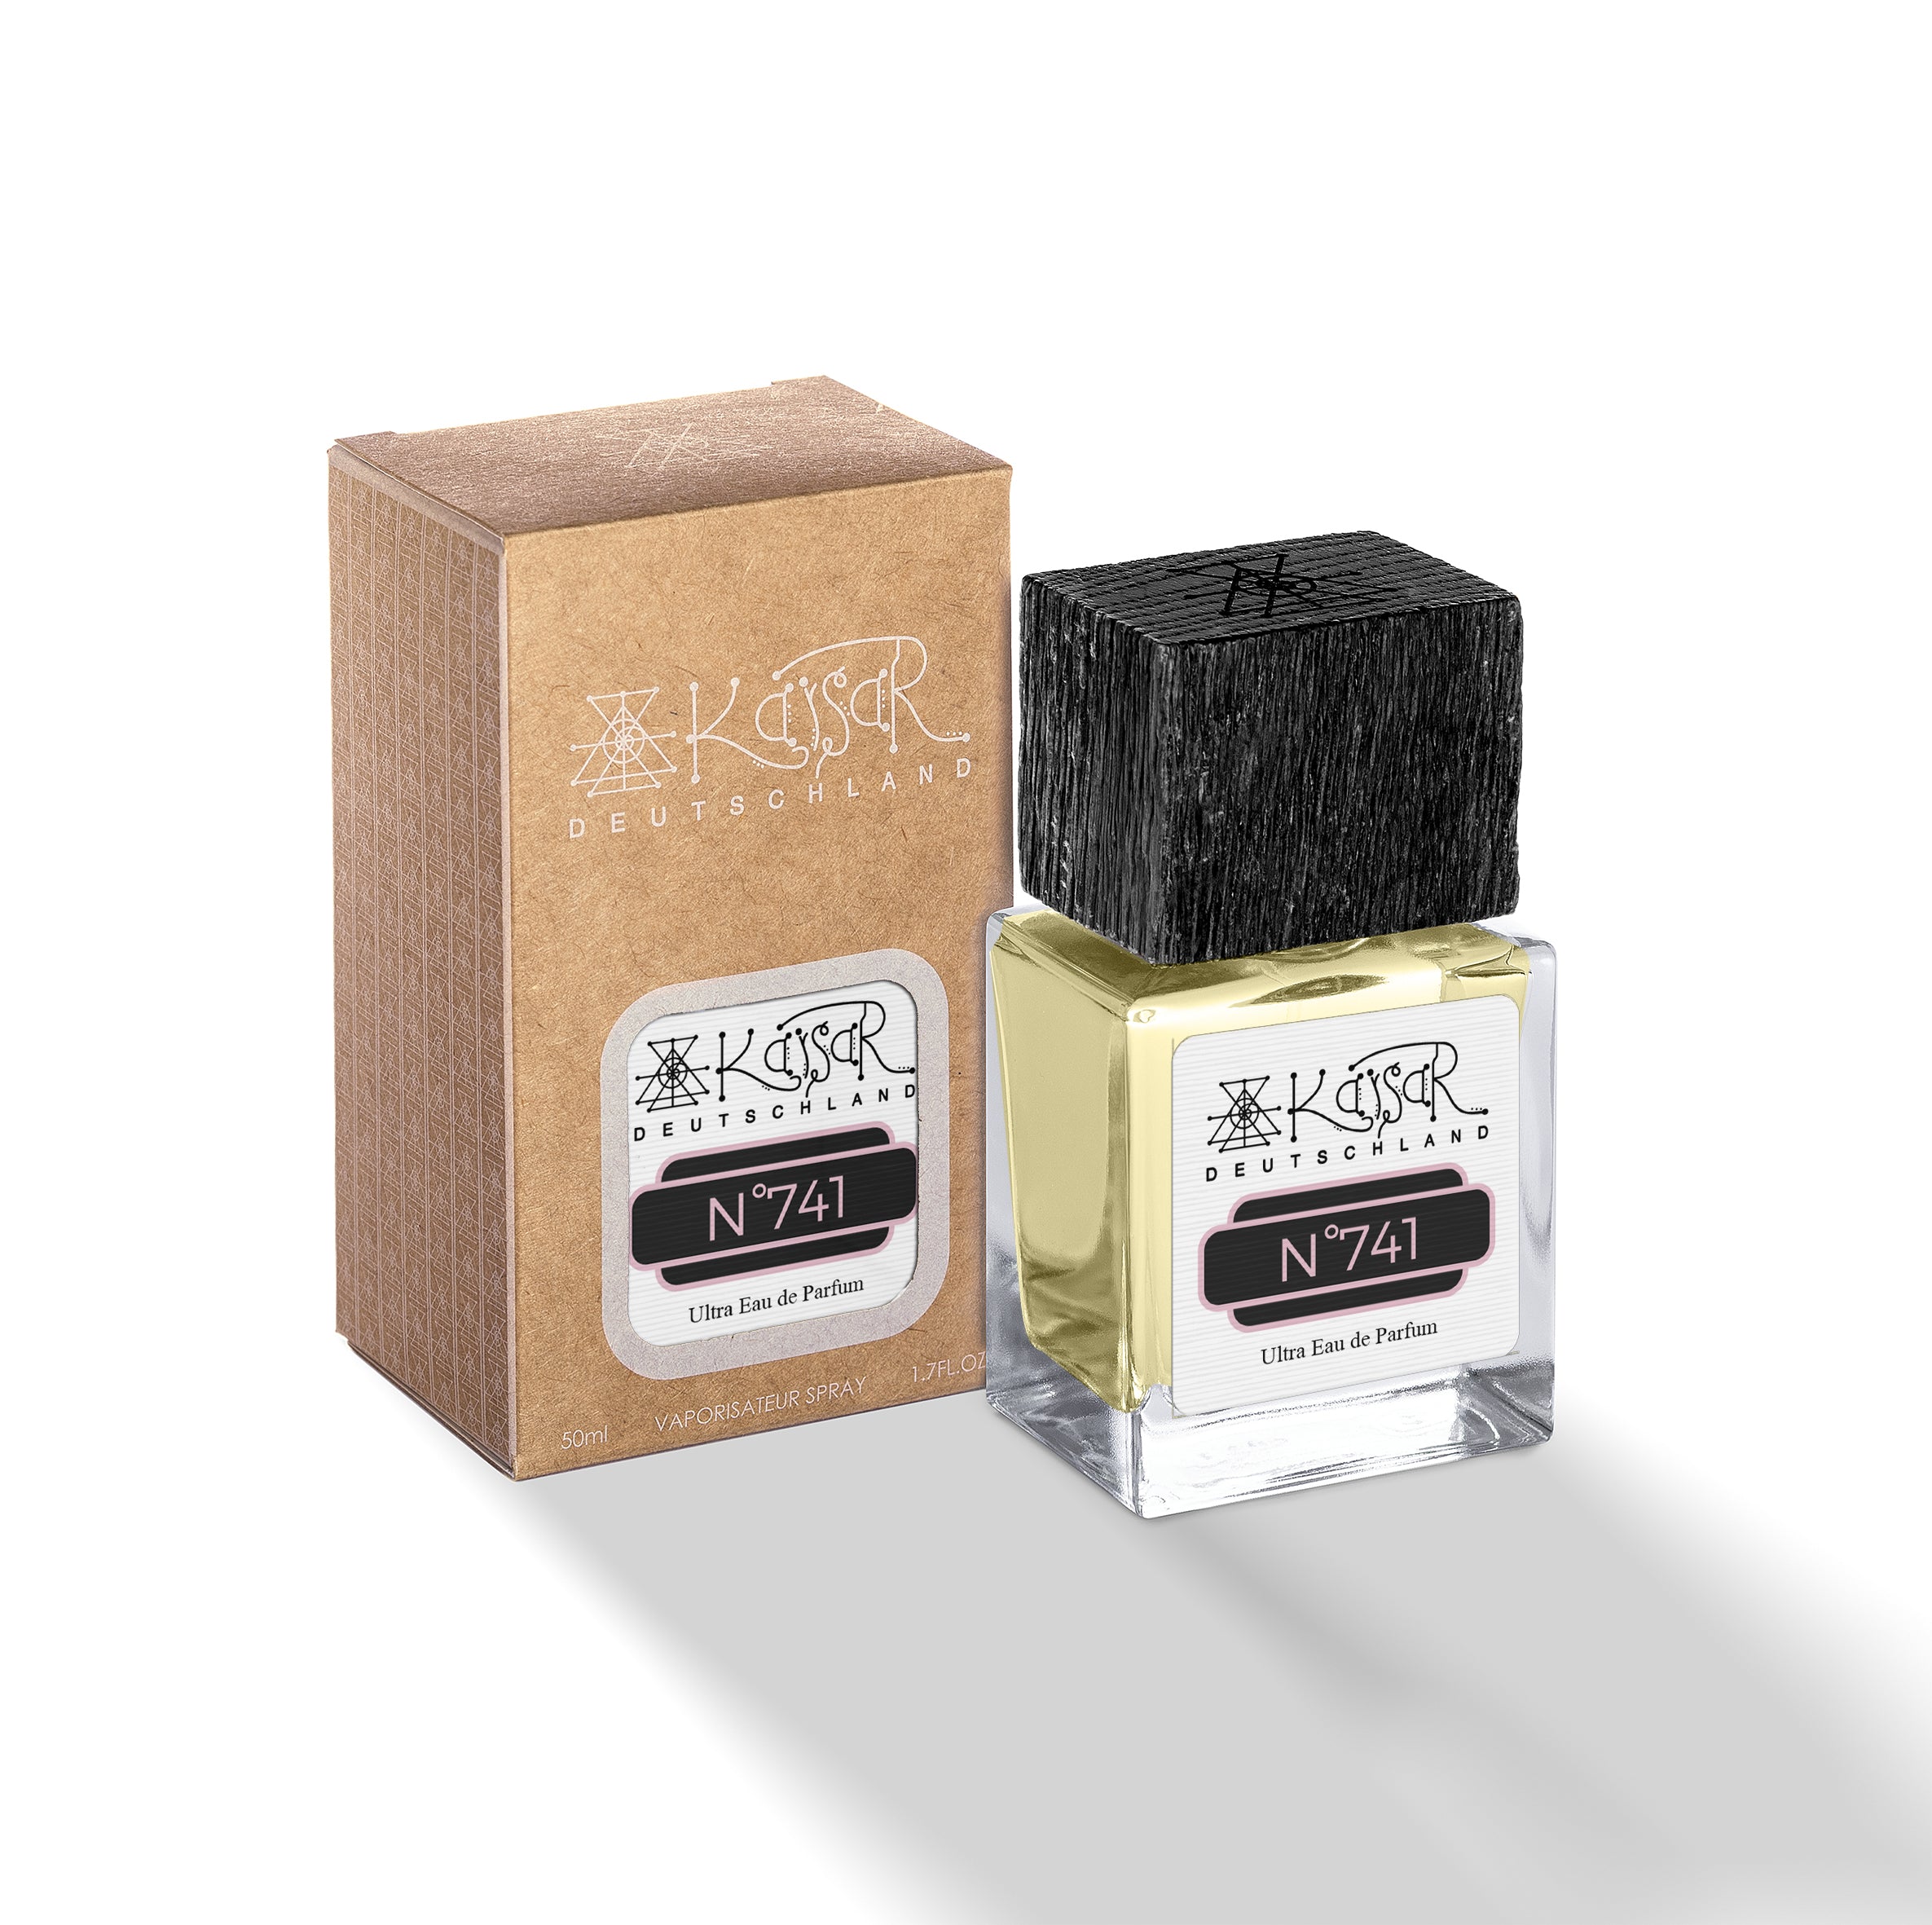 N°741 Negeh Soll Scent